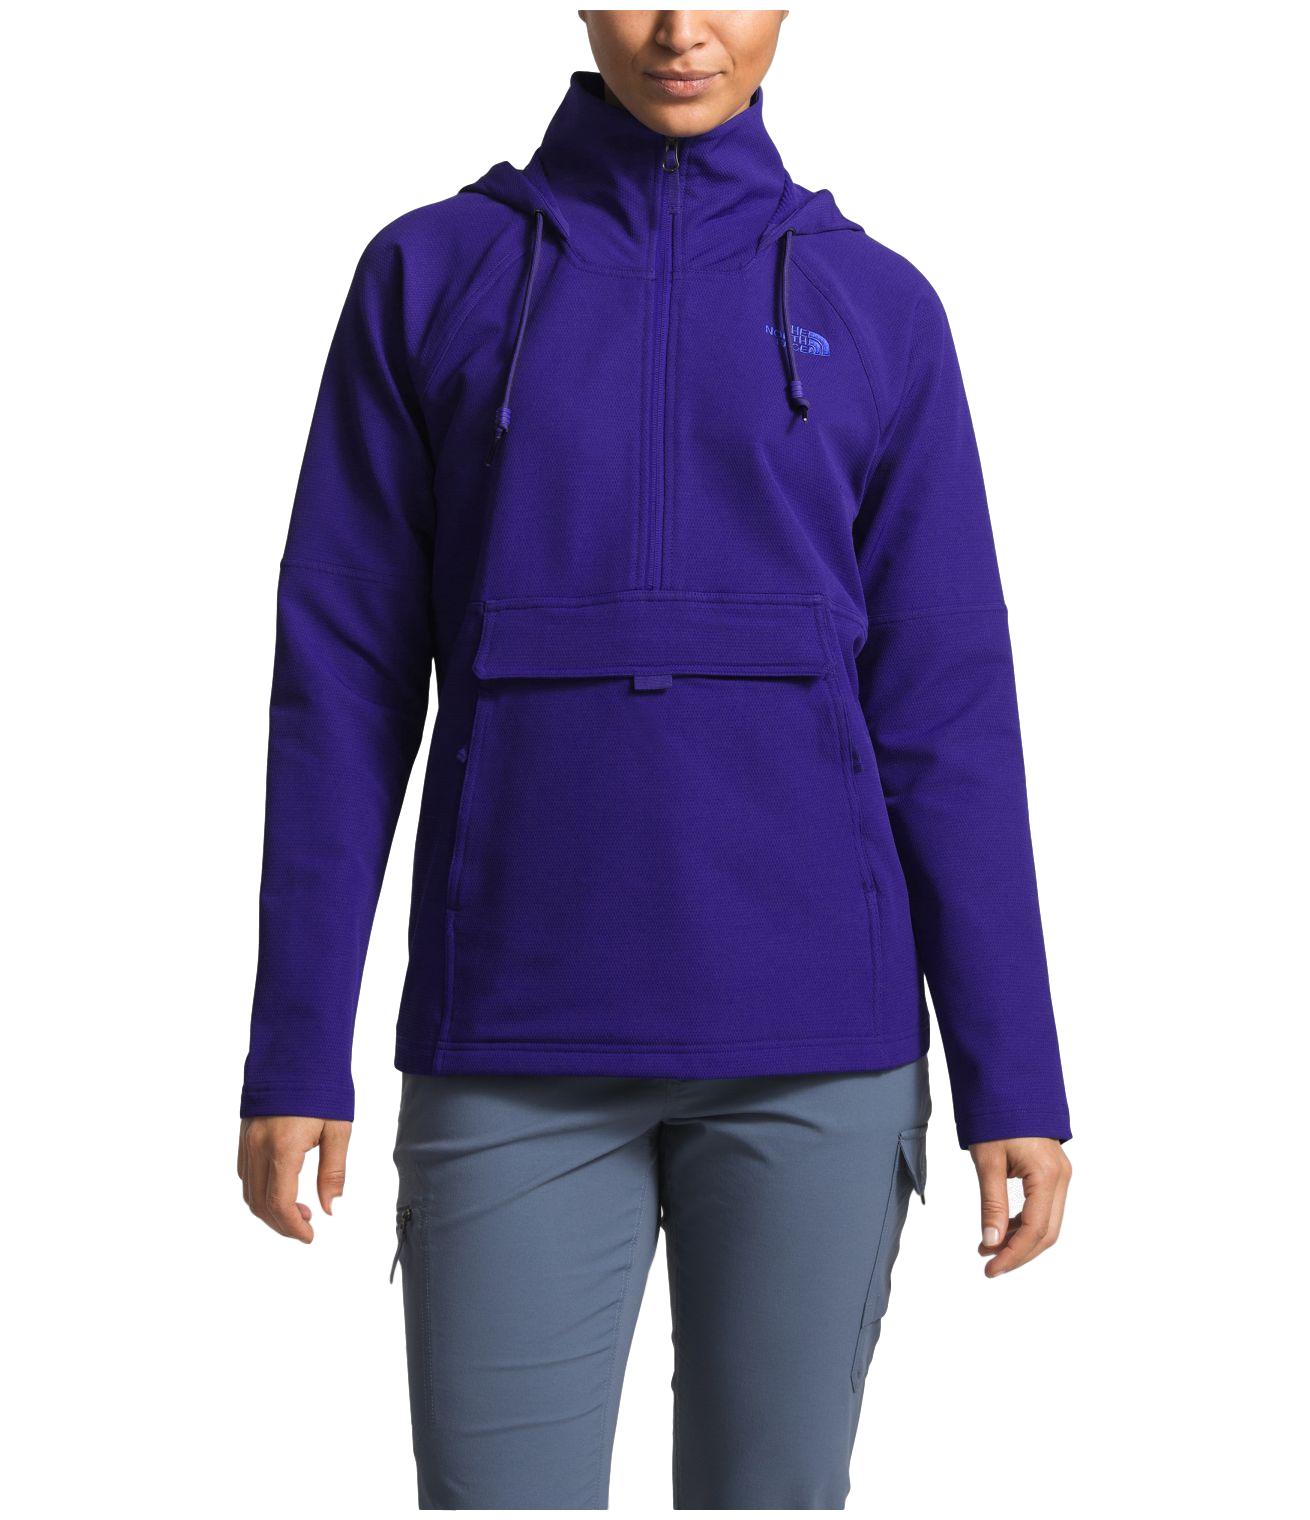 north face tekno ridge hoodie review